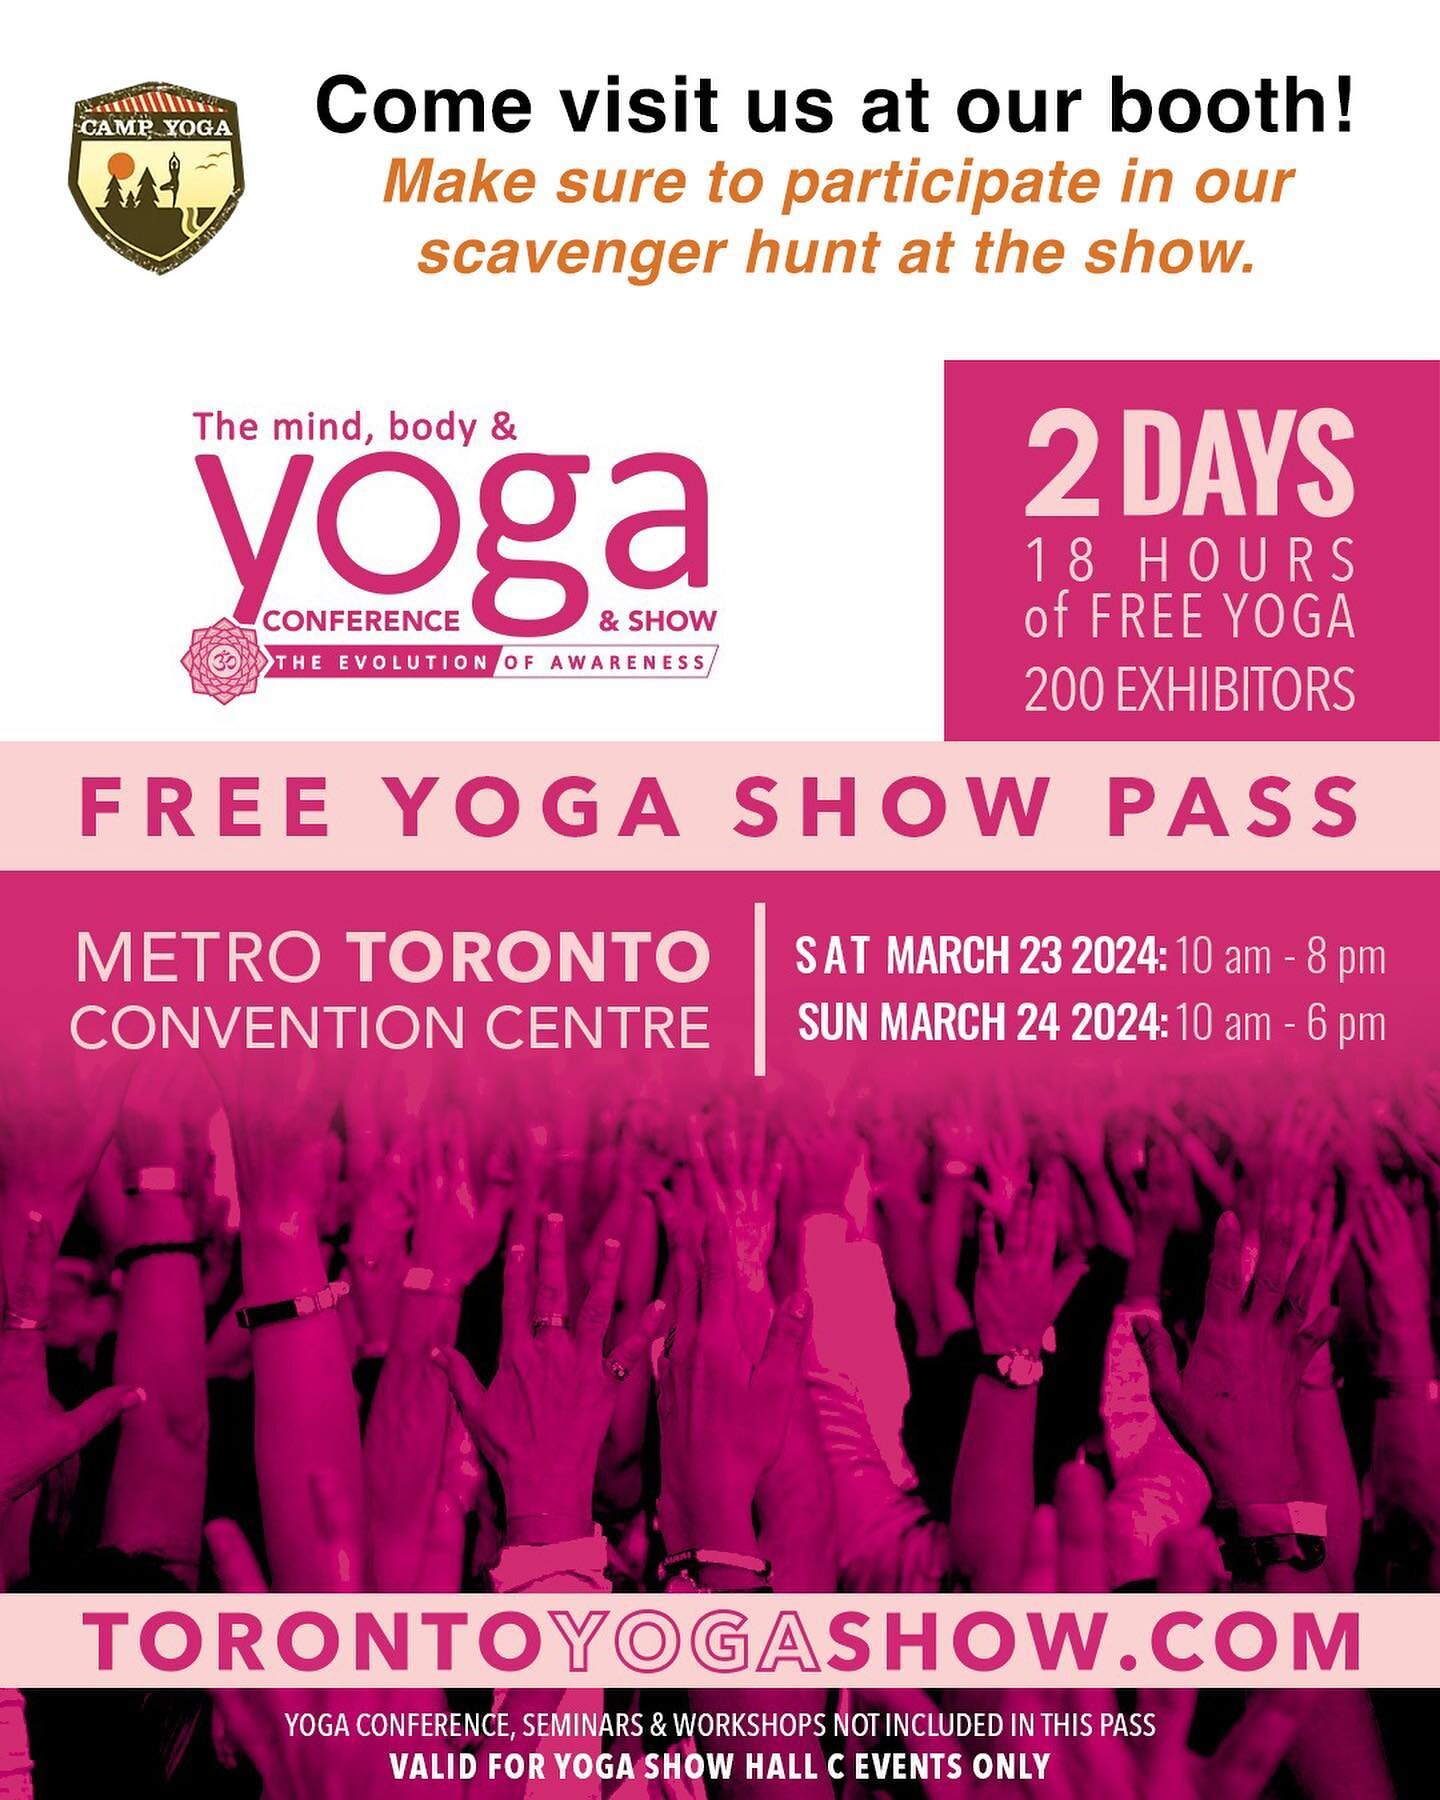 Join us at the Yoga Conference Show in Toronto this weekend, March 23-24, at the Metro Toronto Convention Centre! 🧘&zwj;♂️ Stop by our booth for a chance to participate in our exciting scavenger hunt and discover the bliss of Camp Yoga Ontario. See 